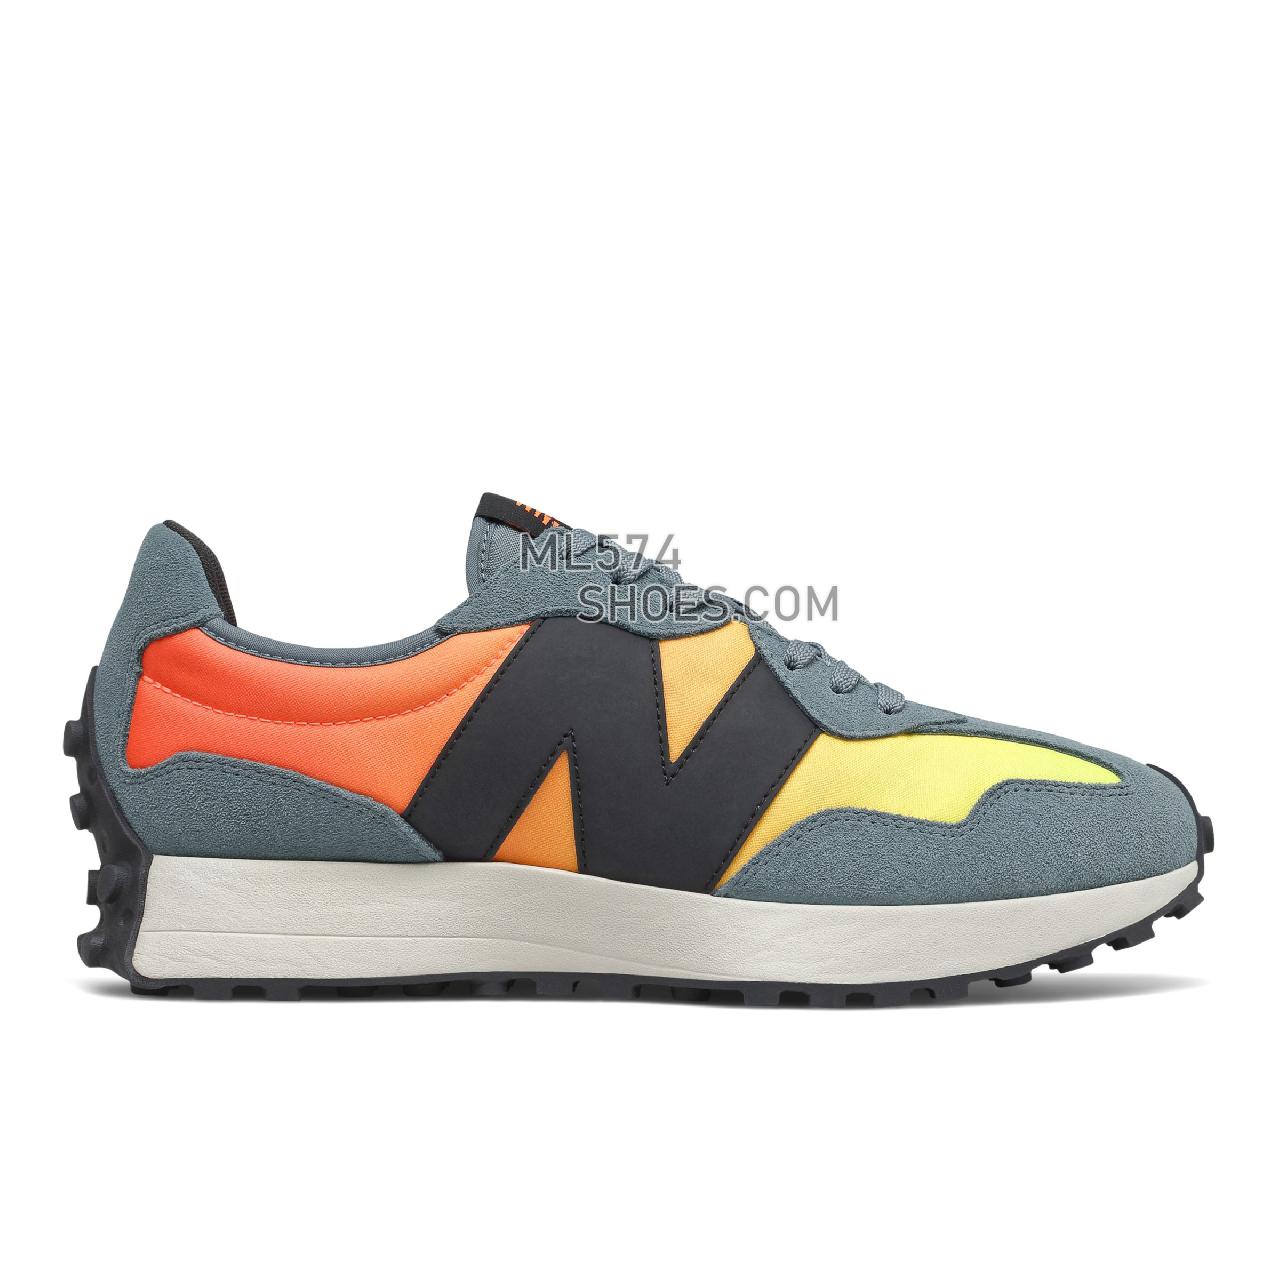 New Balance 327 - Men's Sport Style Sneakers - Citrus Punch with Cyclone - MS327SC